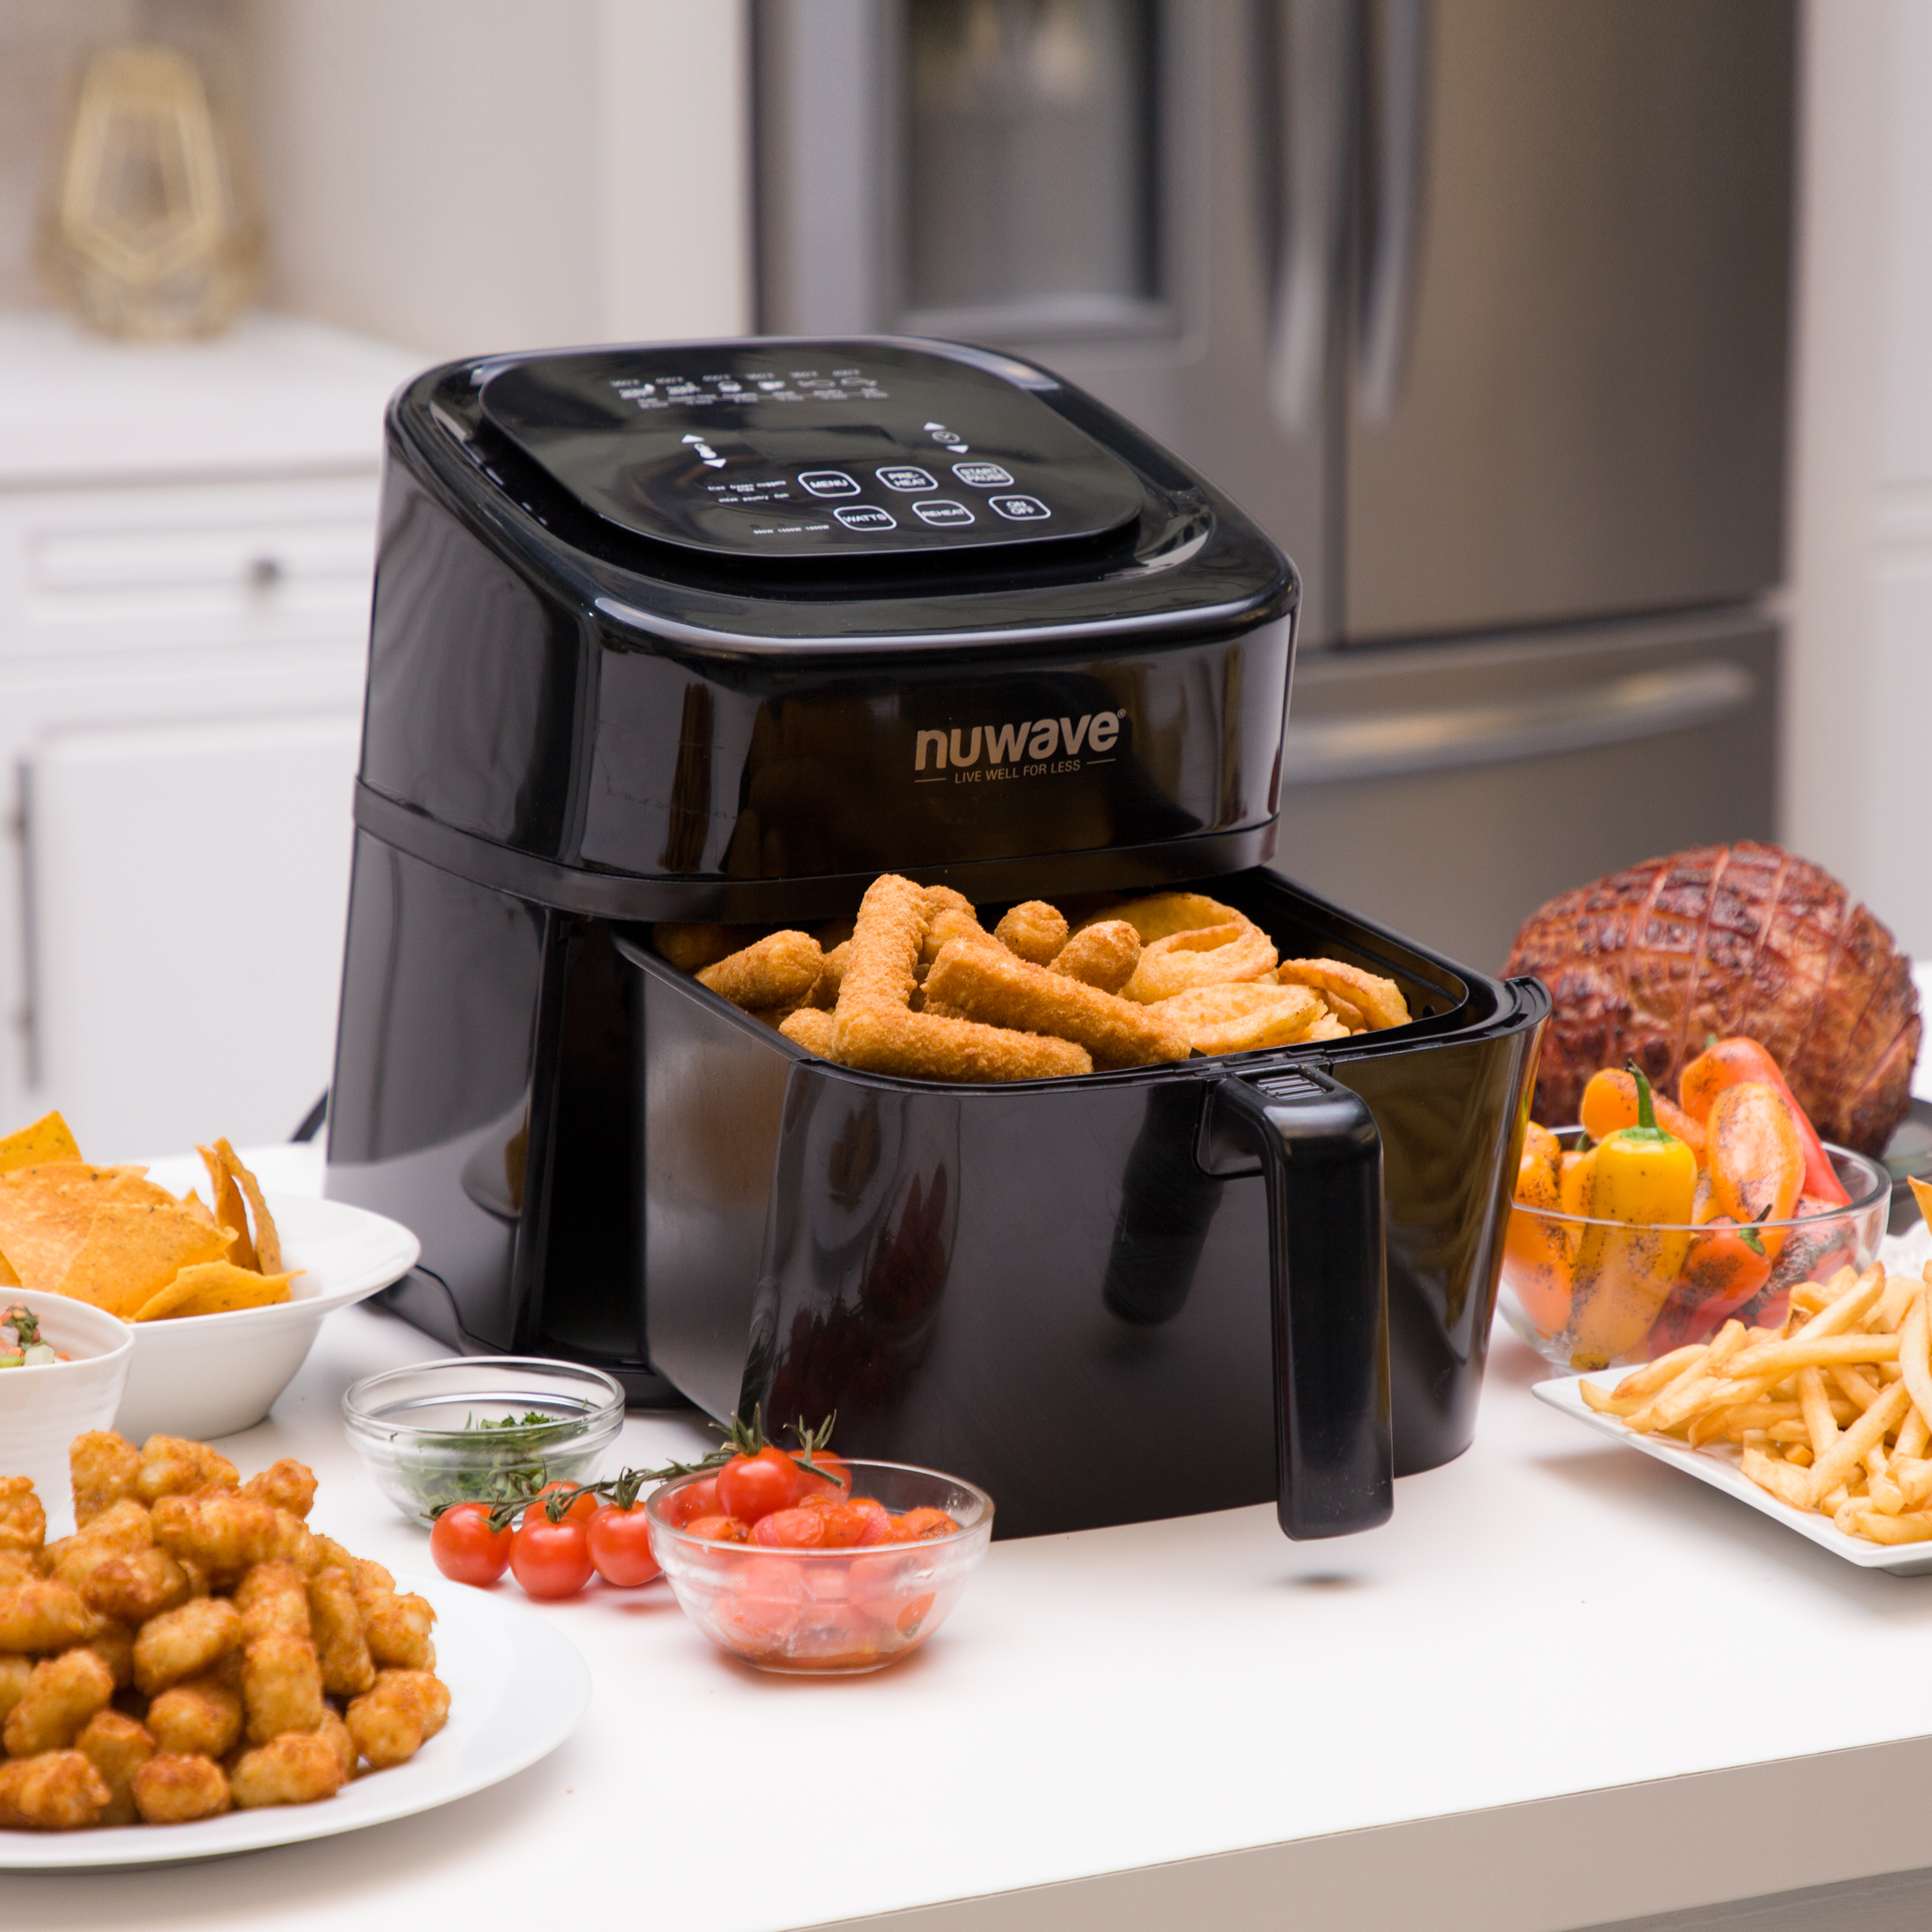 NuWave Brio 6-Quart Digital Air Fryer with One-Touch Digital Controls, Automatic Shutoff, Stainless Steel - image 3 of 11